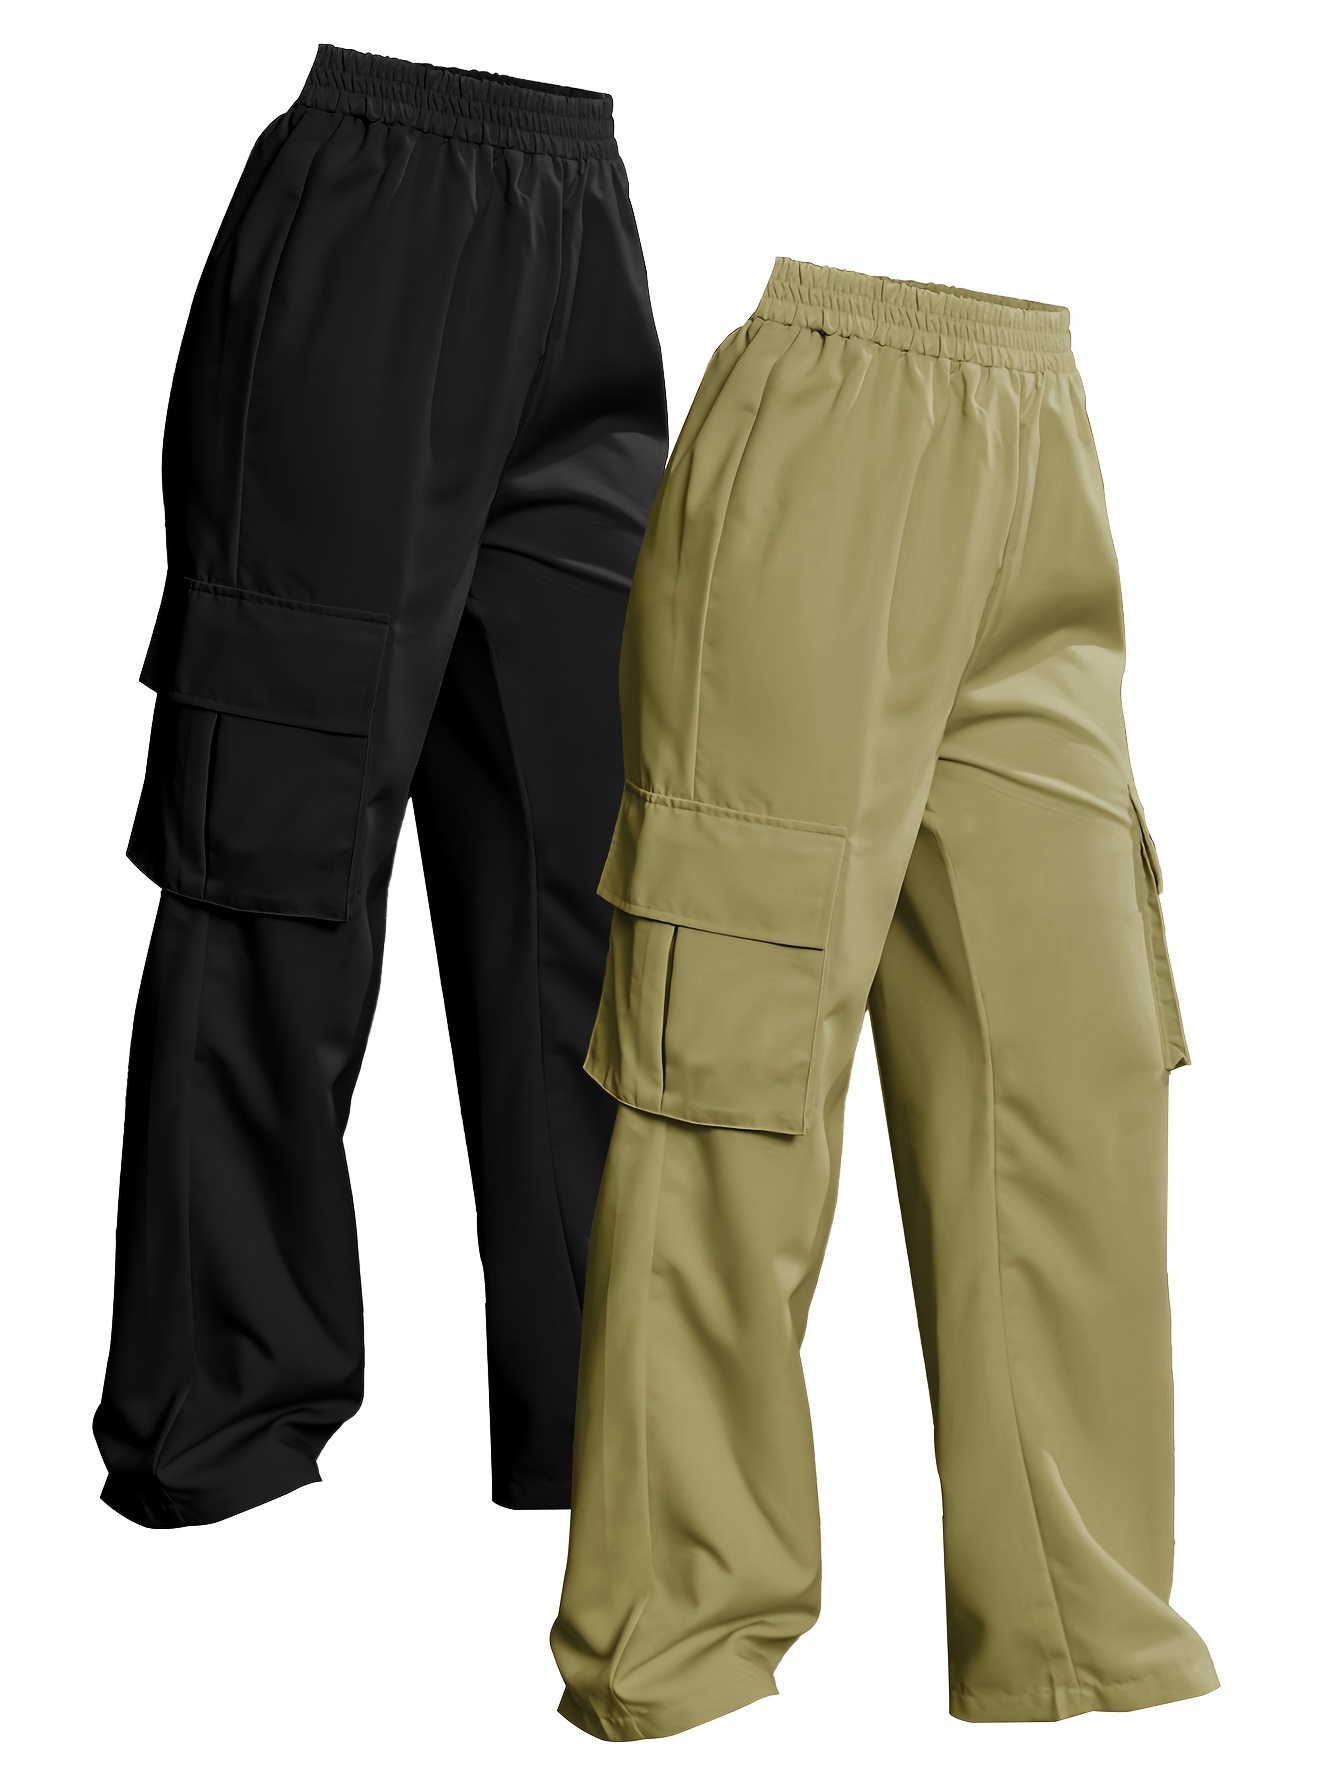 Zumba Wear Cargo Pant For Women - Green: Buy Online at Best Price